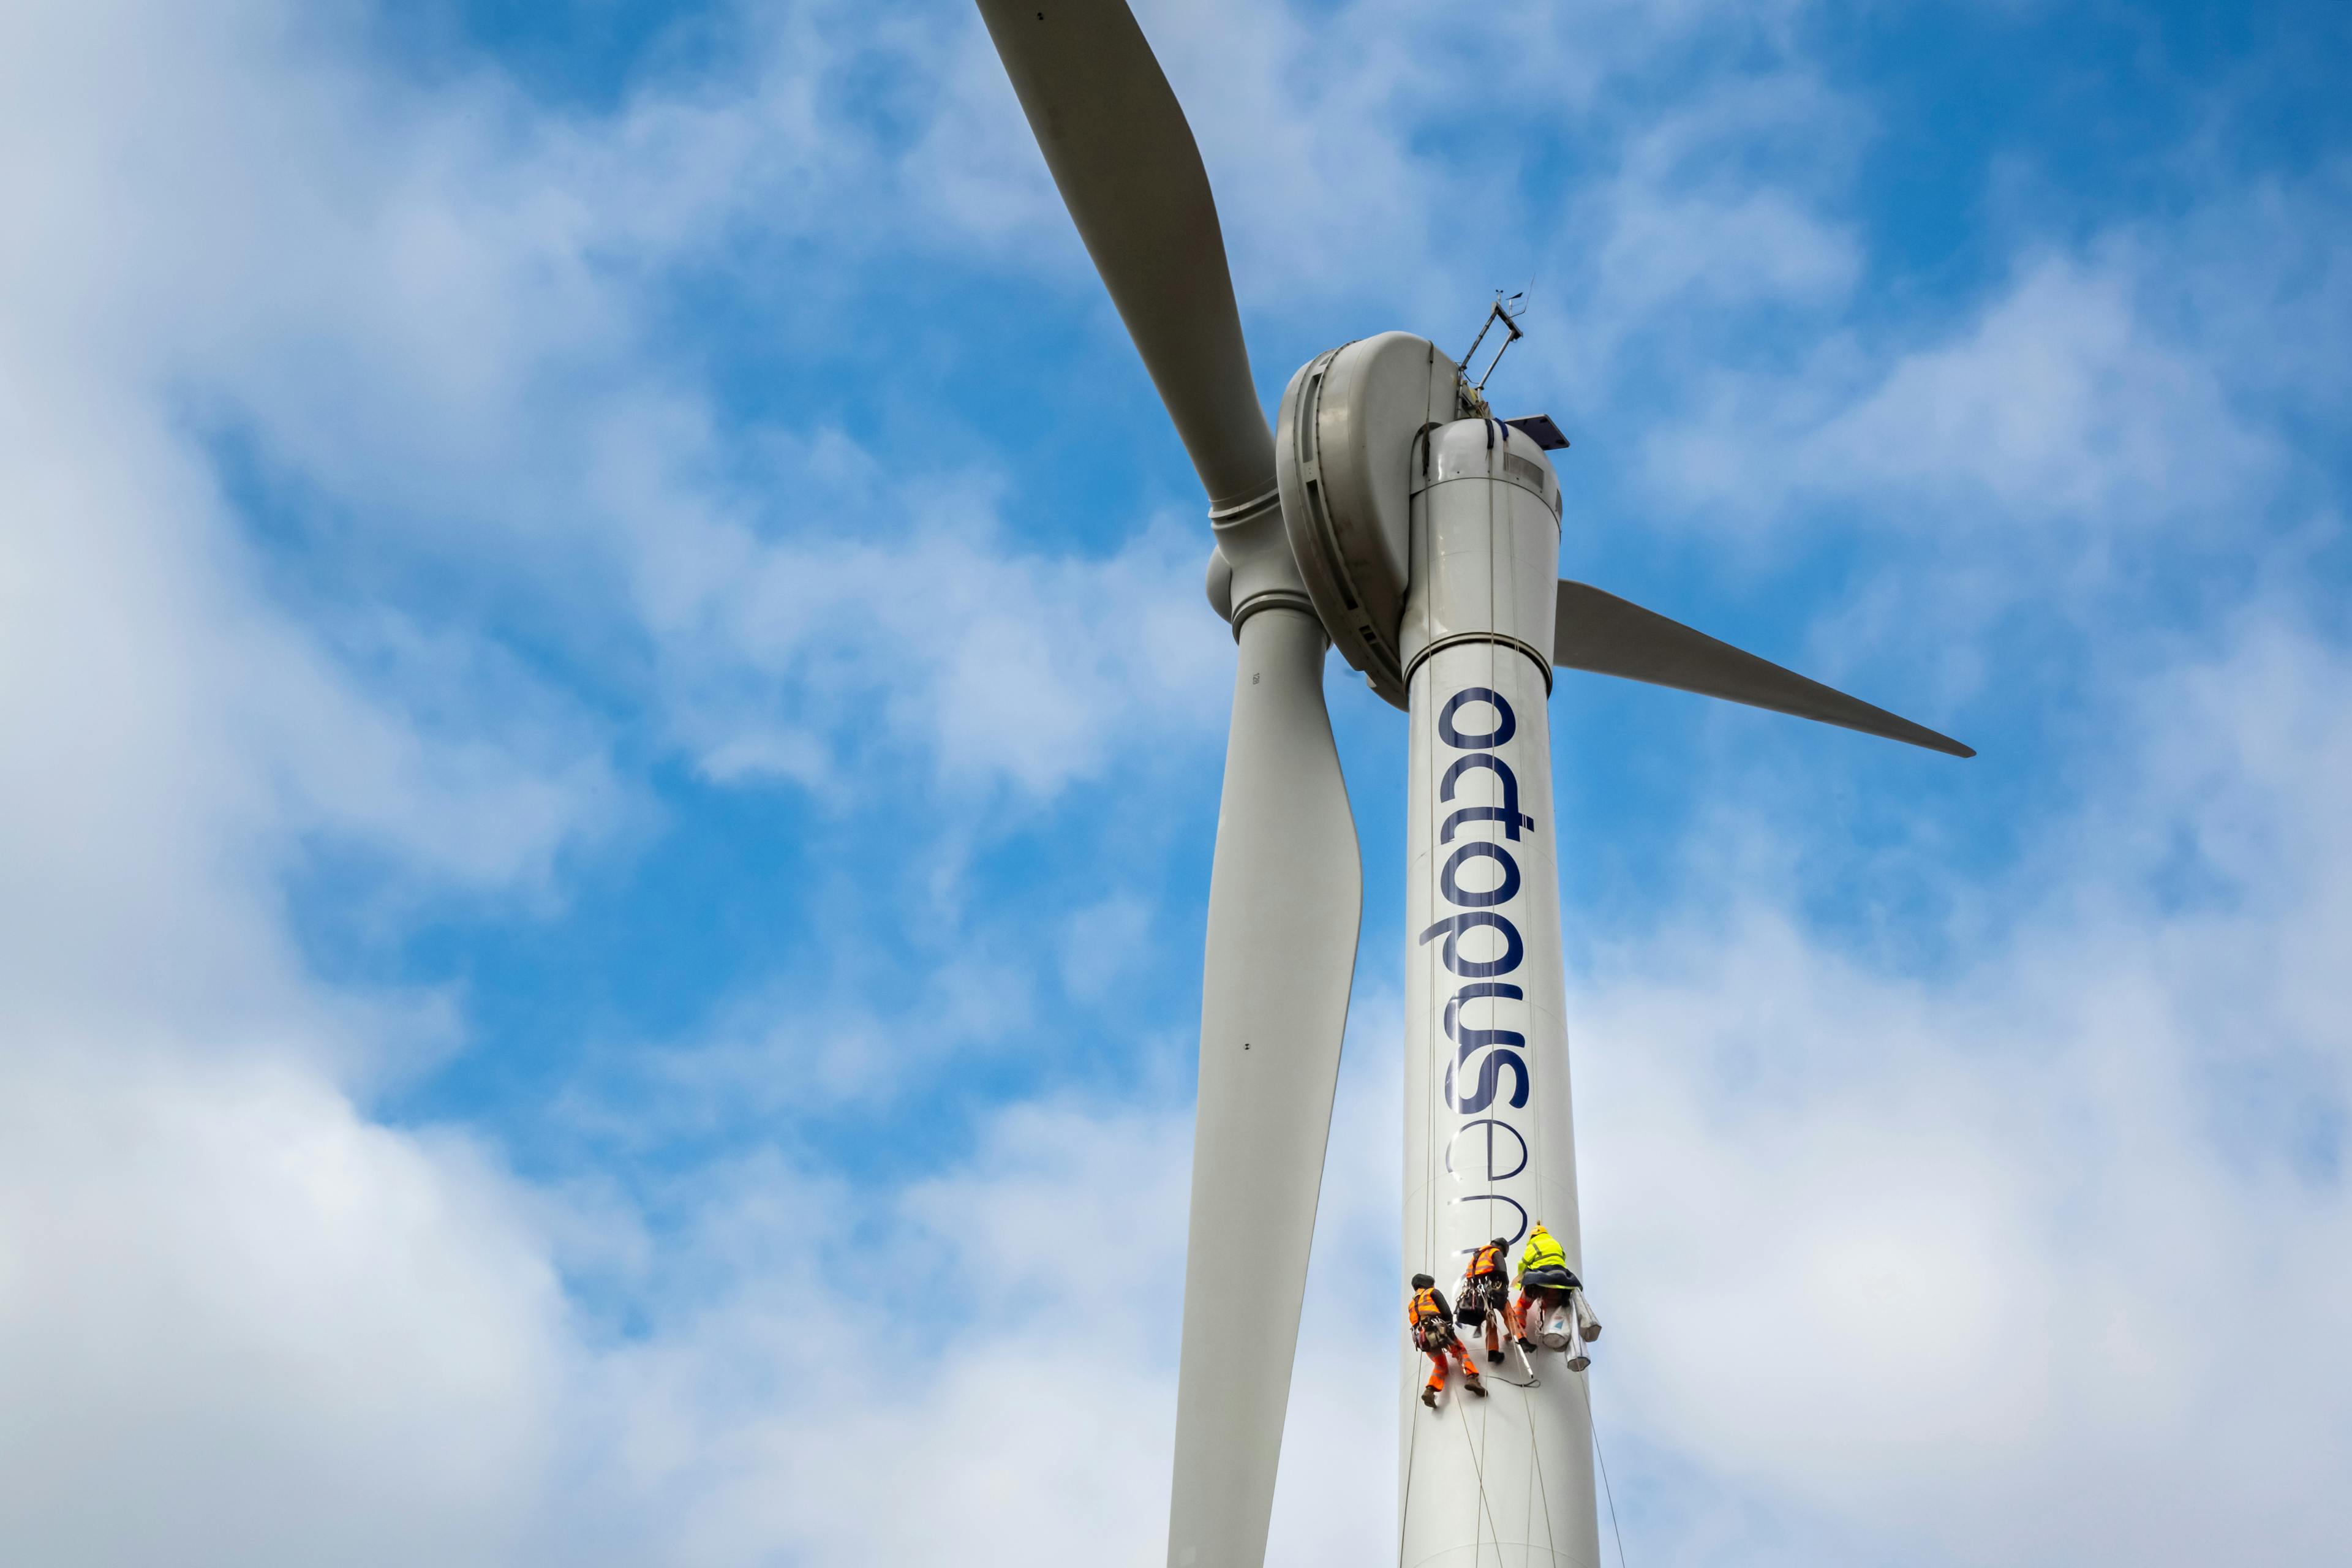 A close-up of a wind turbine in the sky with workers applying the Octopus Energy logo to the stem